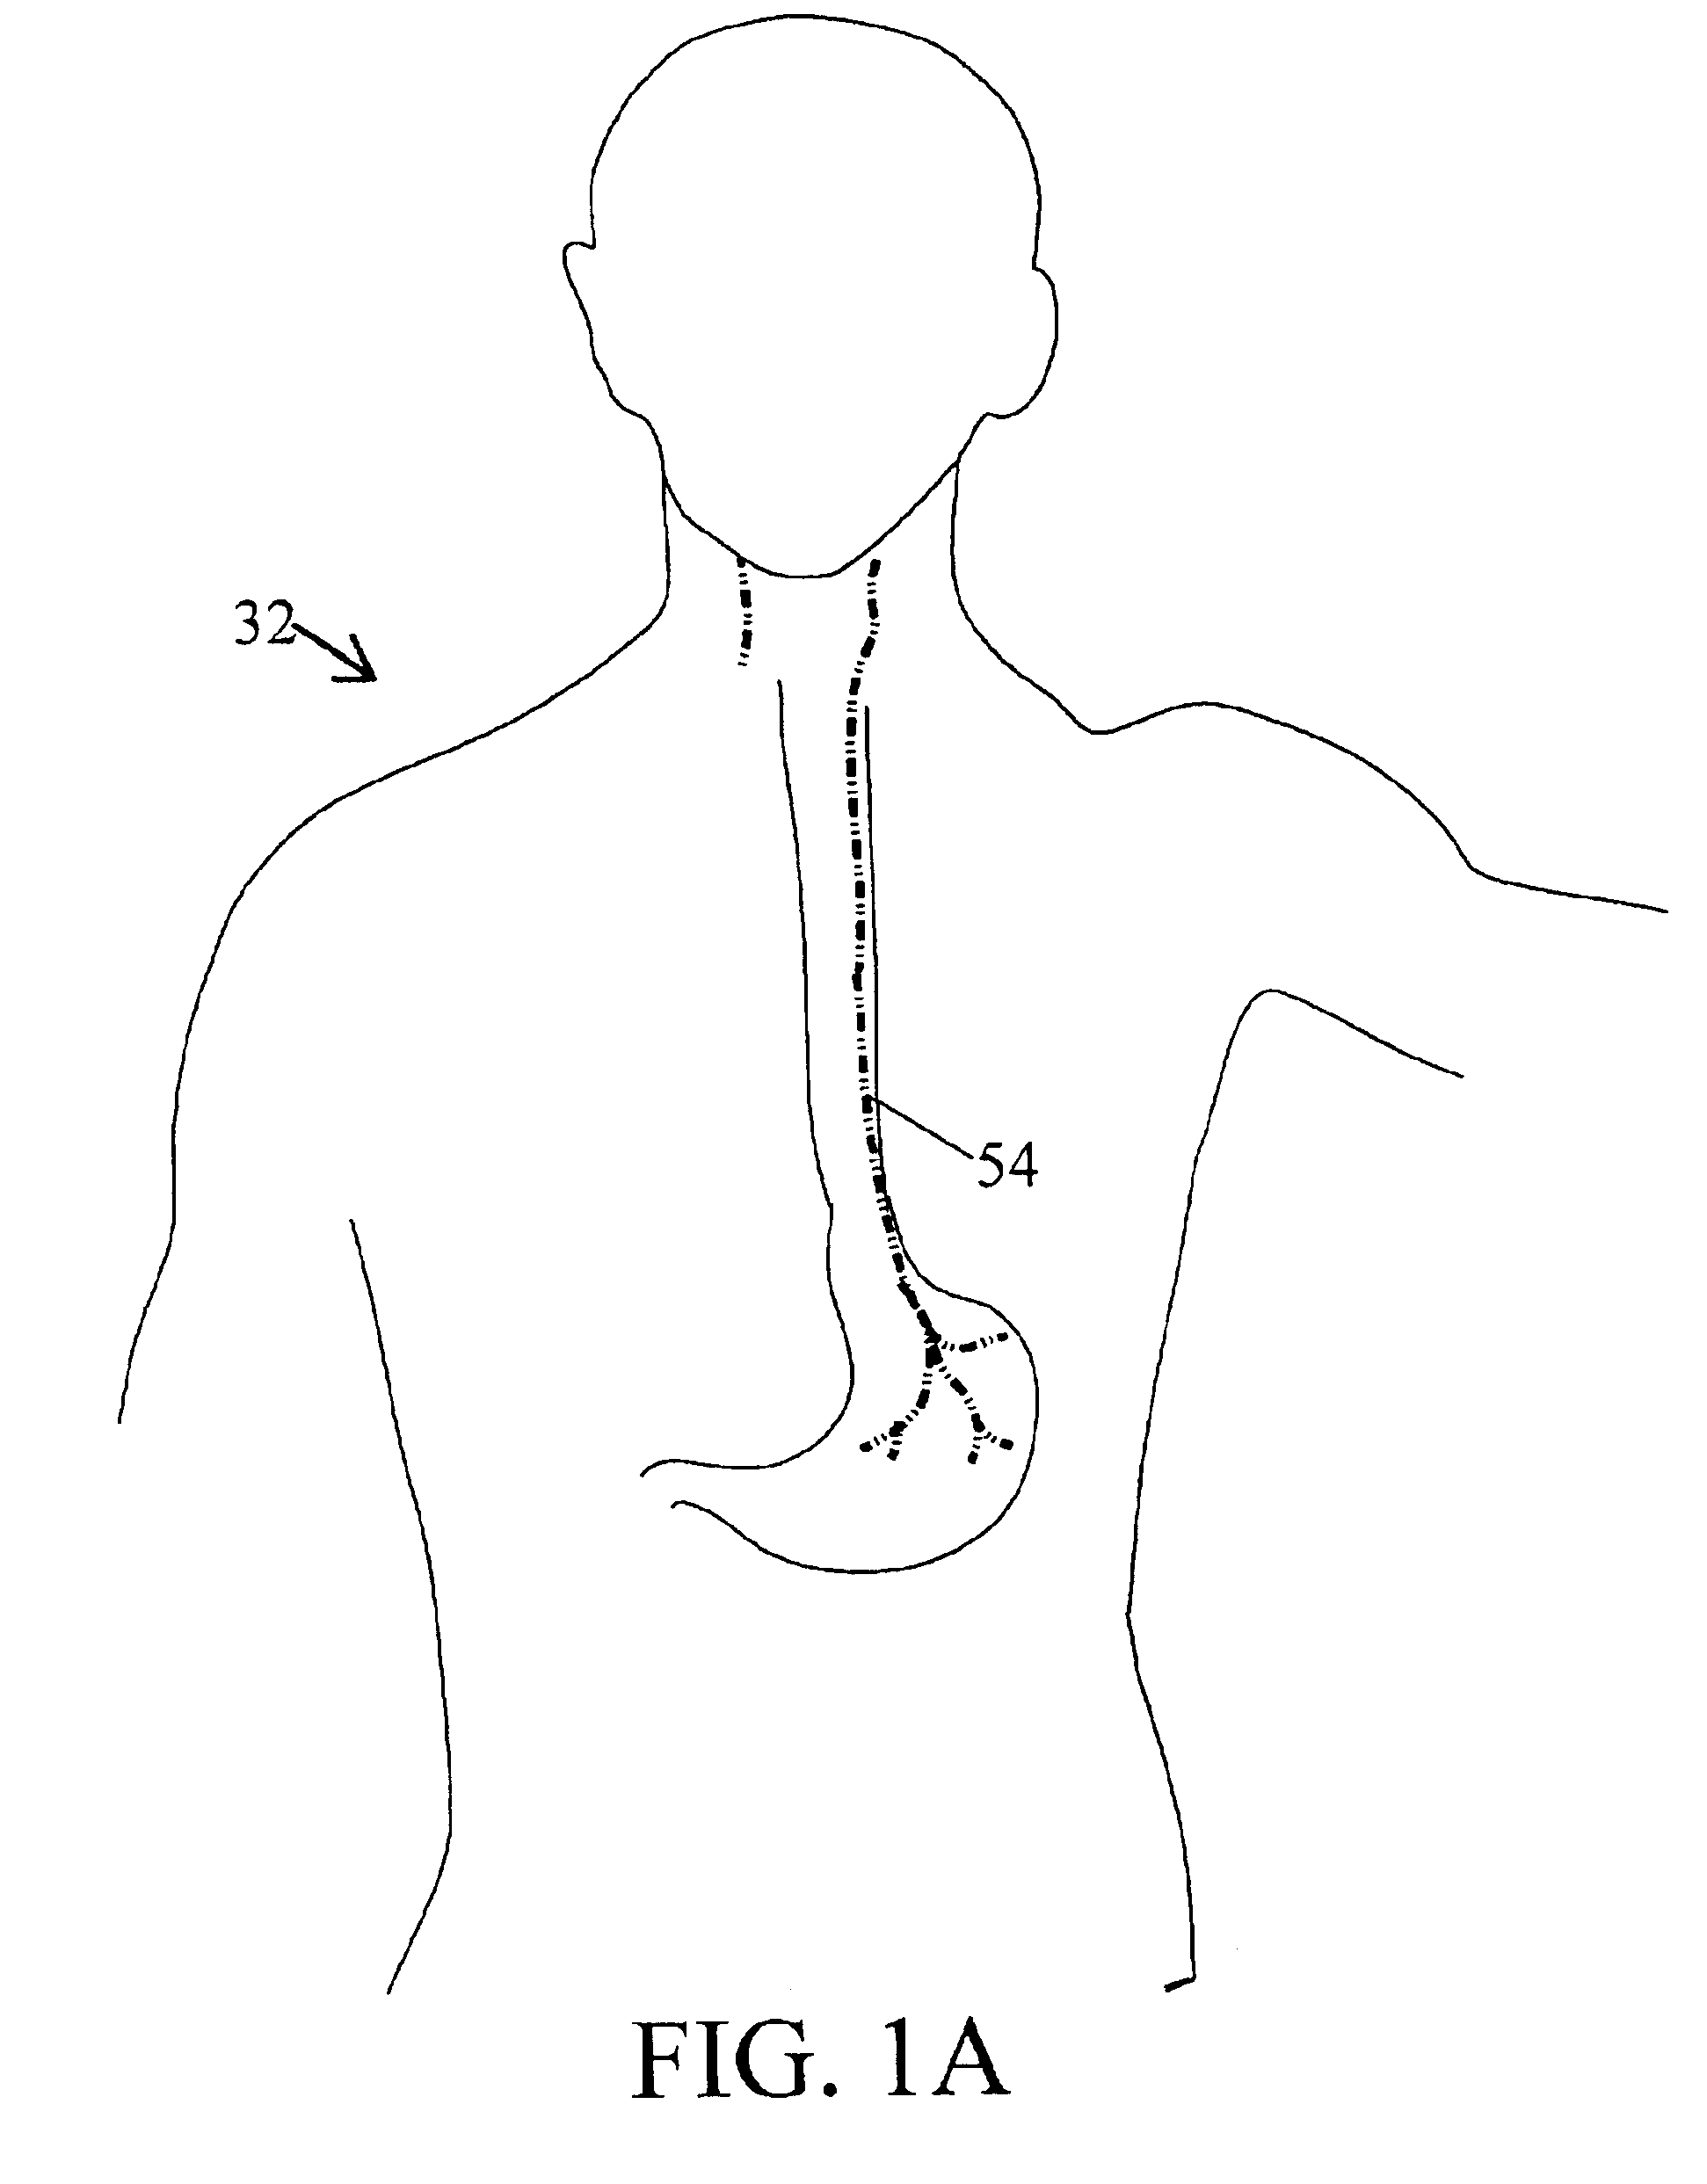 External pulse generator for adjunct (add-on) treatment of obesity, eating disorders, neurological, neuropsychiatric, and urological disorders